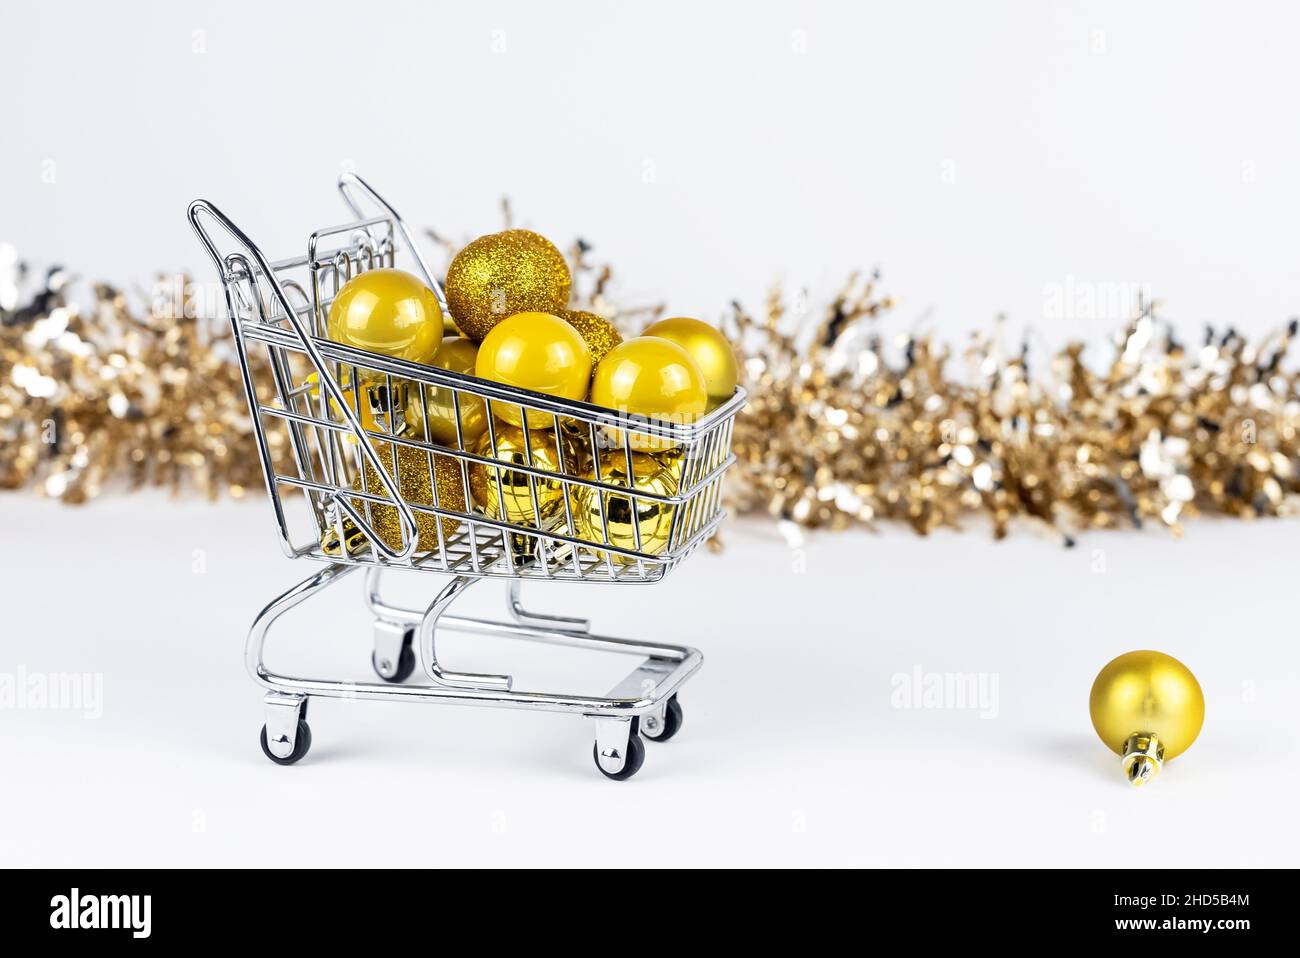 Shopping cart full of Christmas baubles, fallen ball near trolley. New Year consumerism concept. Stock Photo